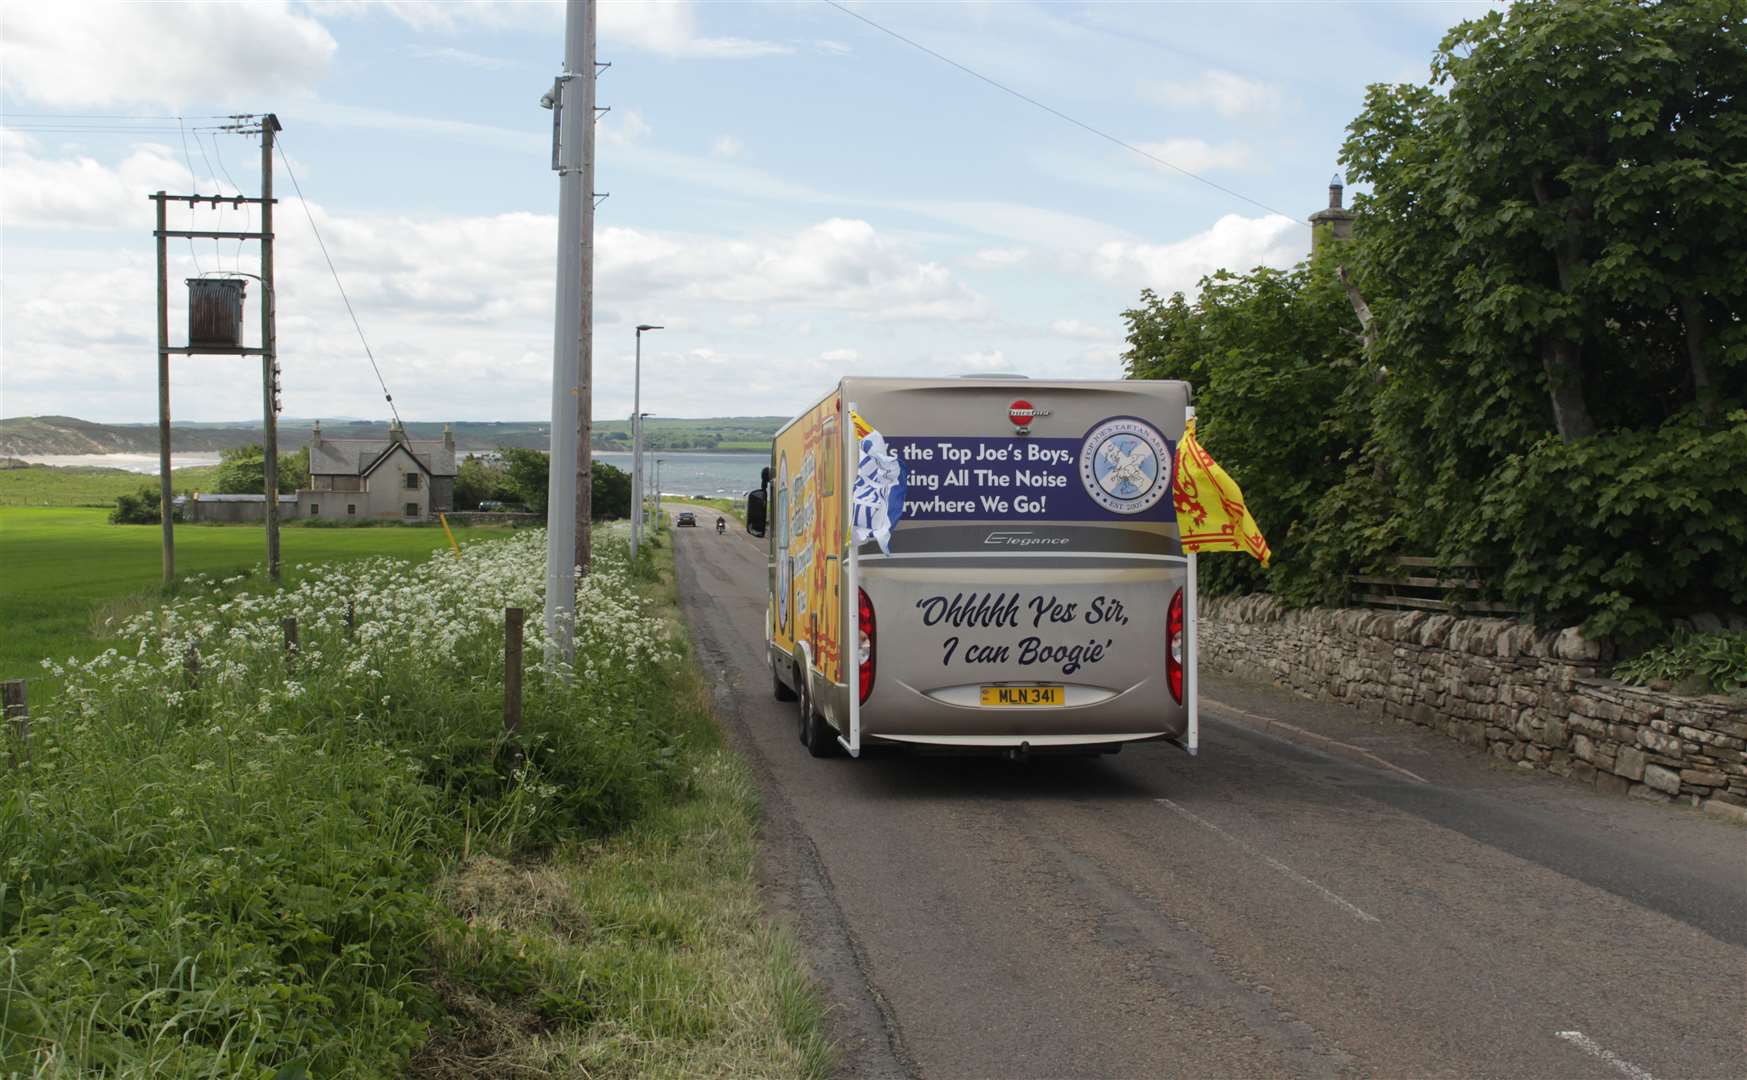 Heading down the road past Dunnet Bay... en route to the delayed Euro 2020 finals. Picture: Alan Hendry